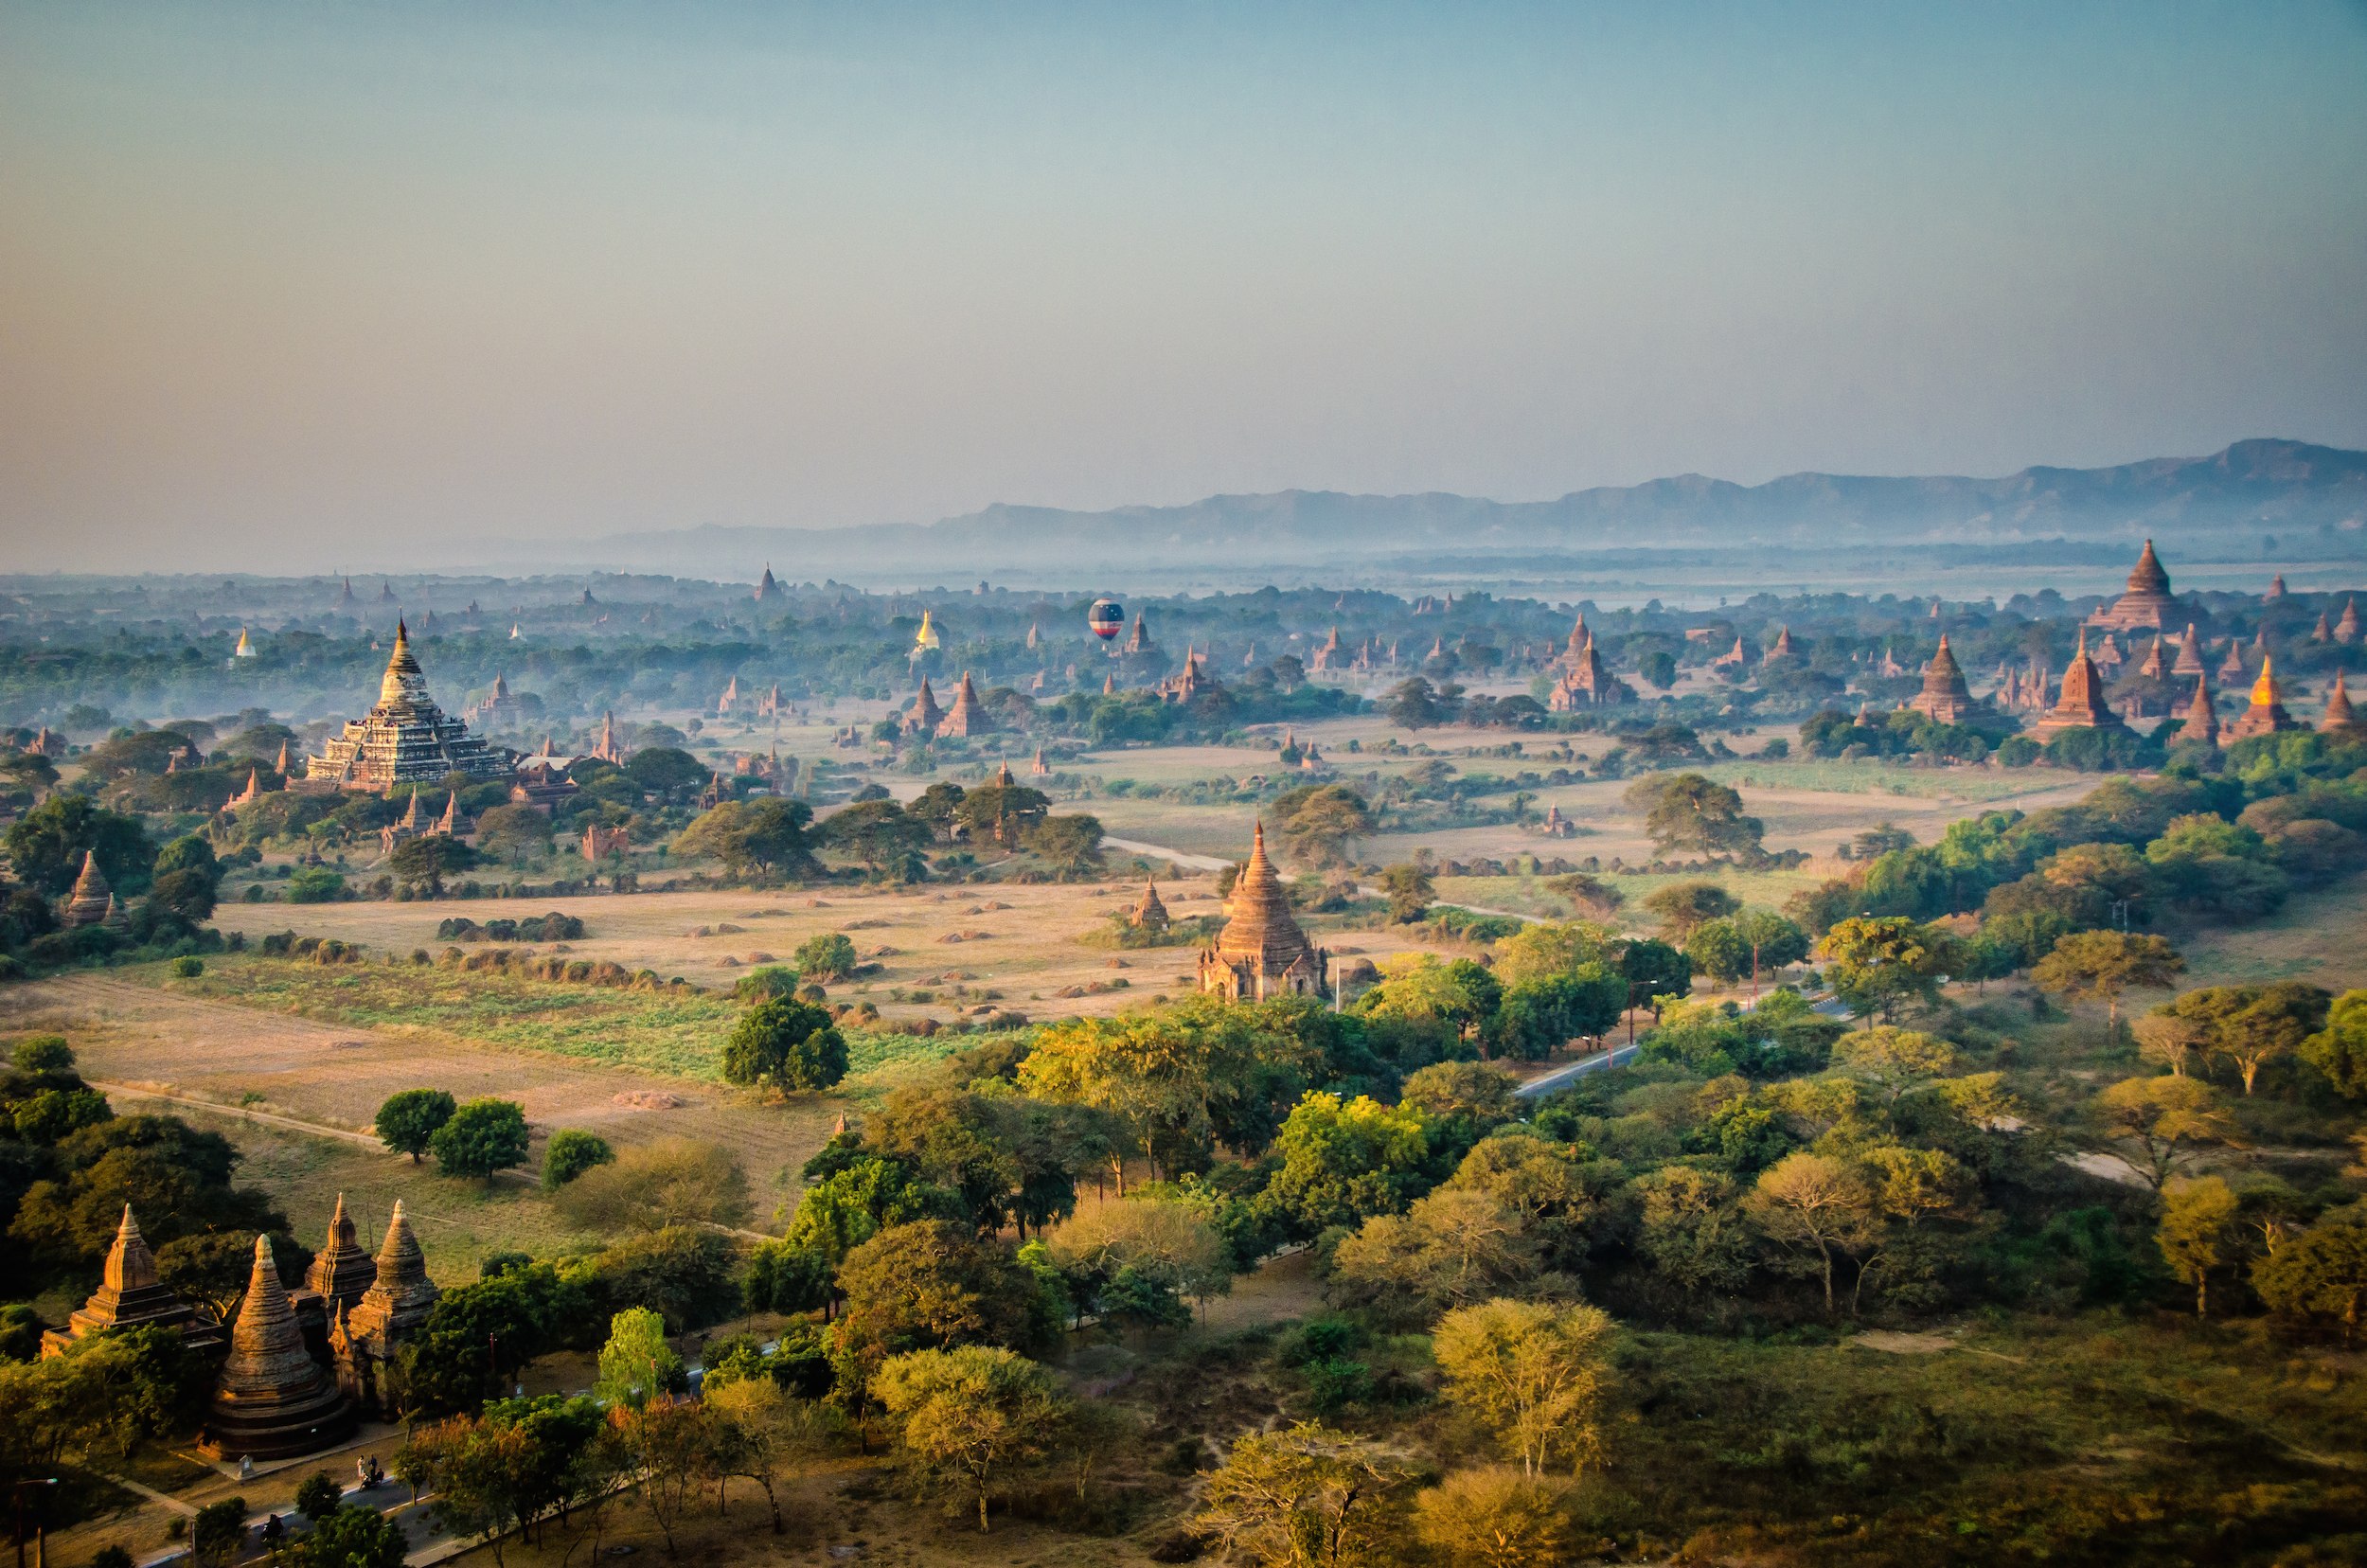 Hundred of temples surrounded by green fields and bushes, at sunrise